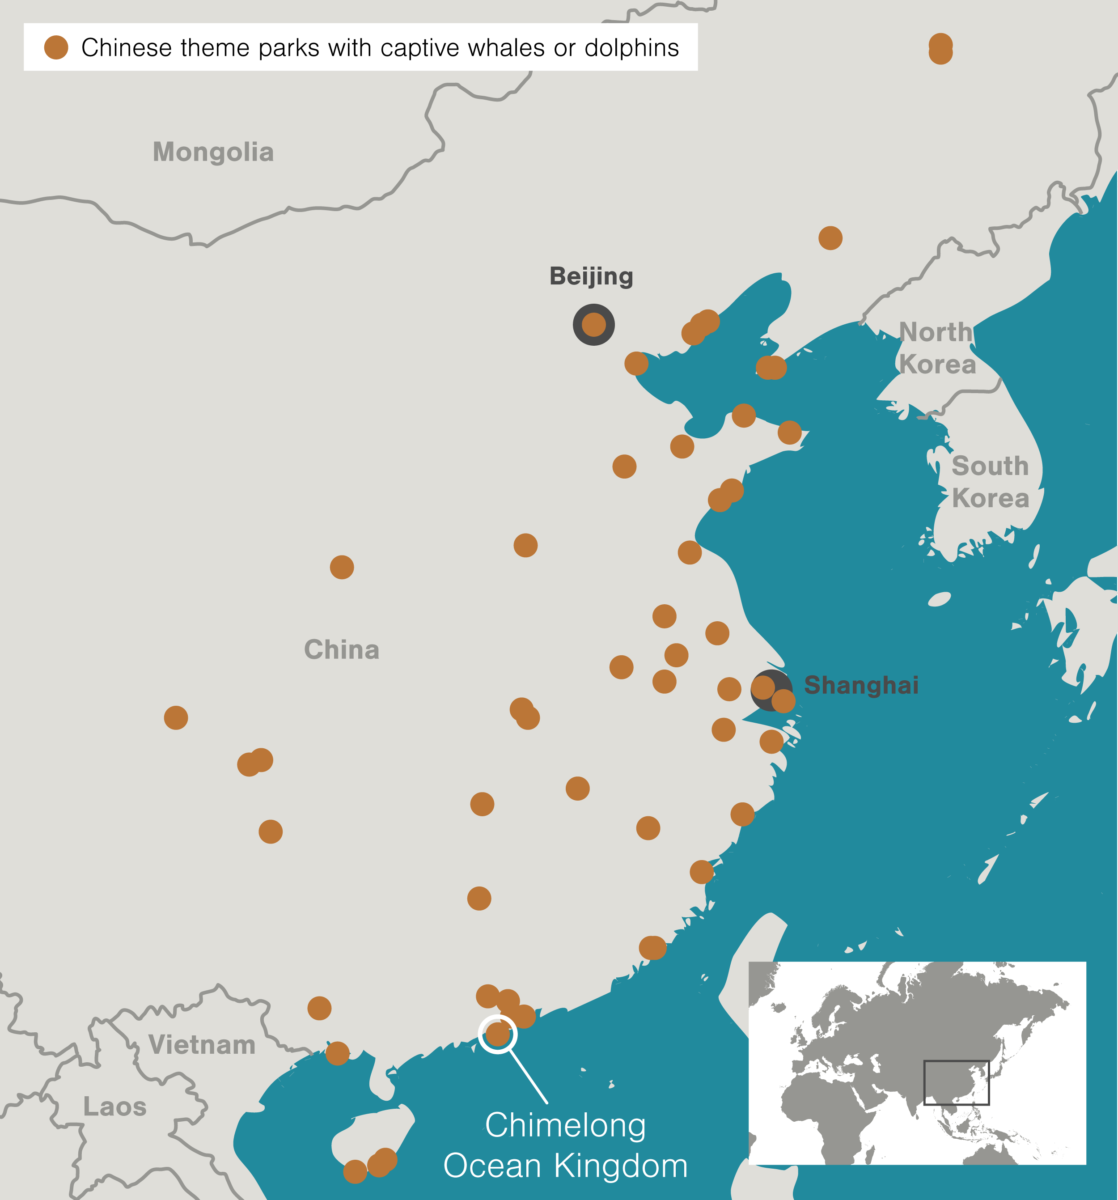 map showing Chinese theme parks with captive whales or dolphins